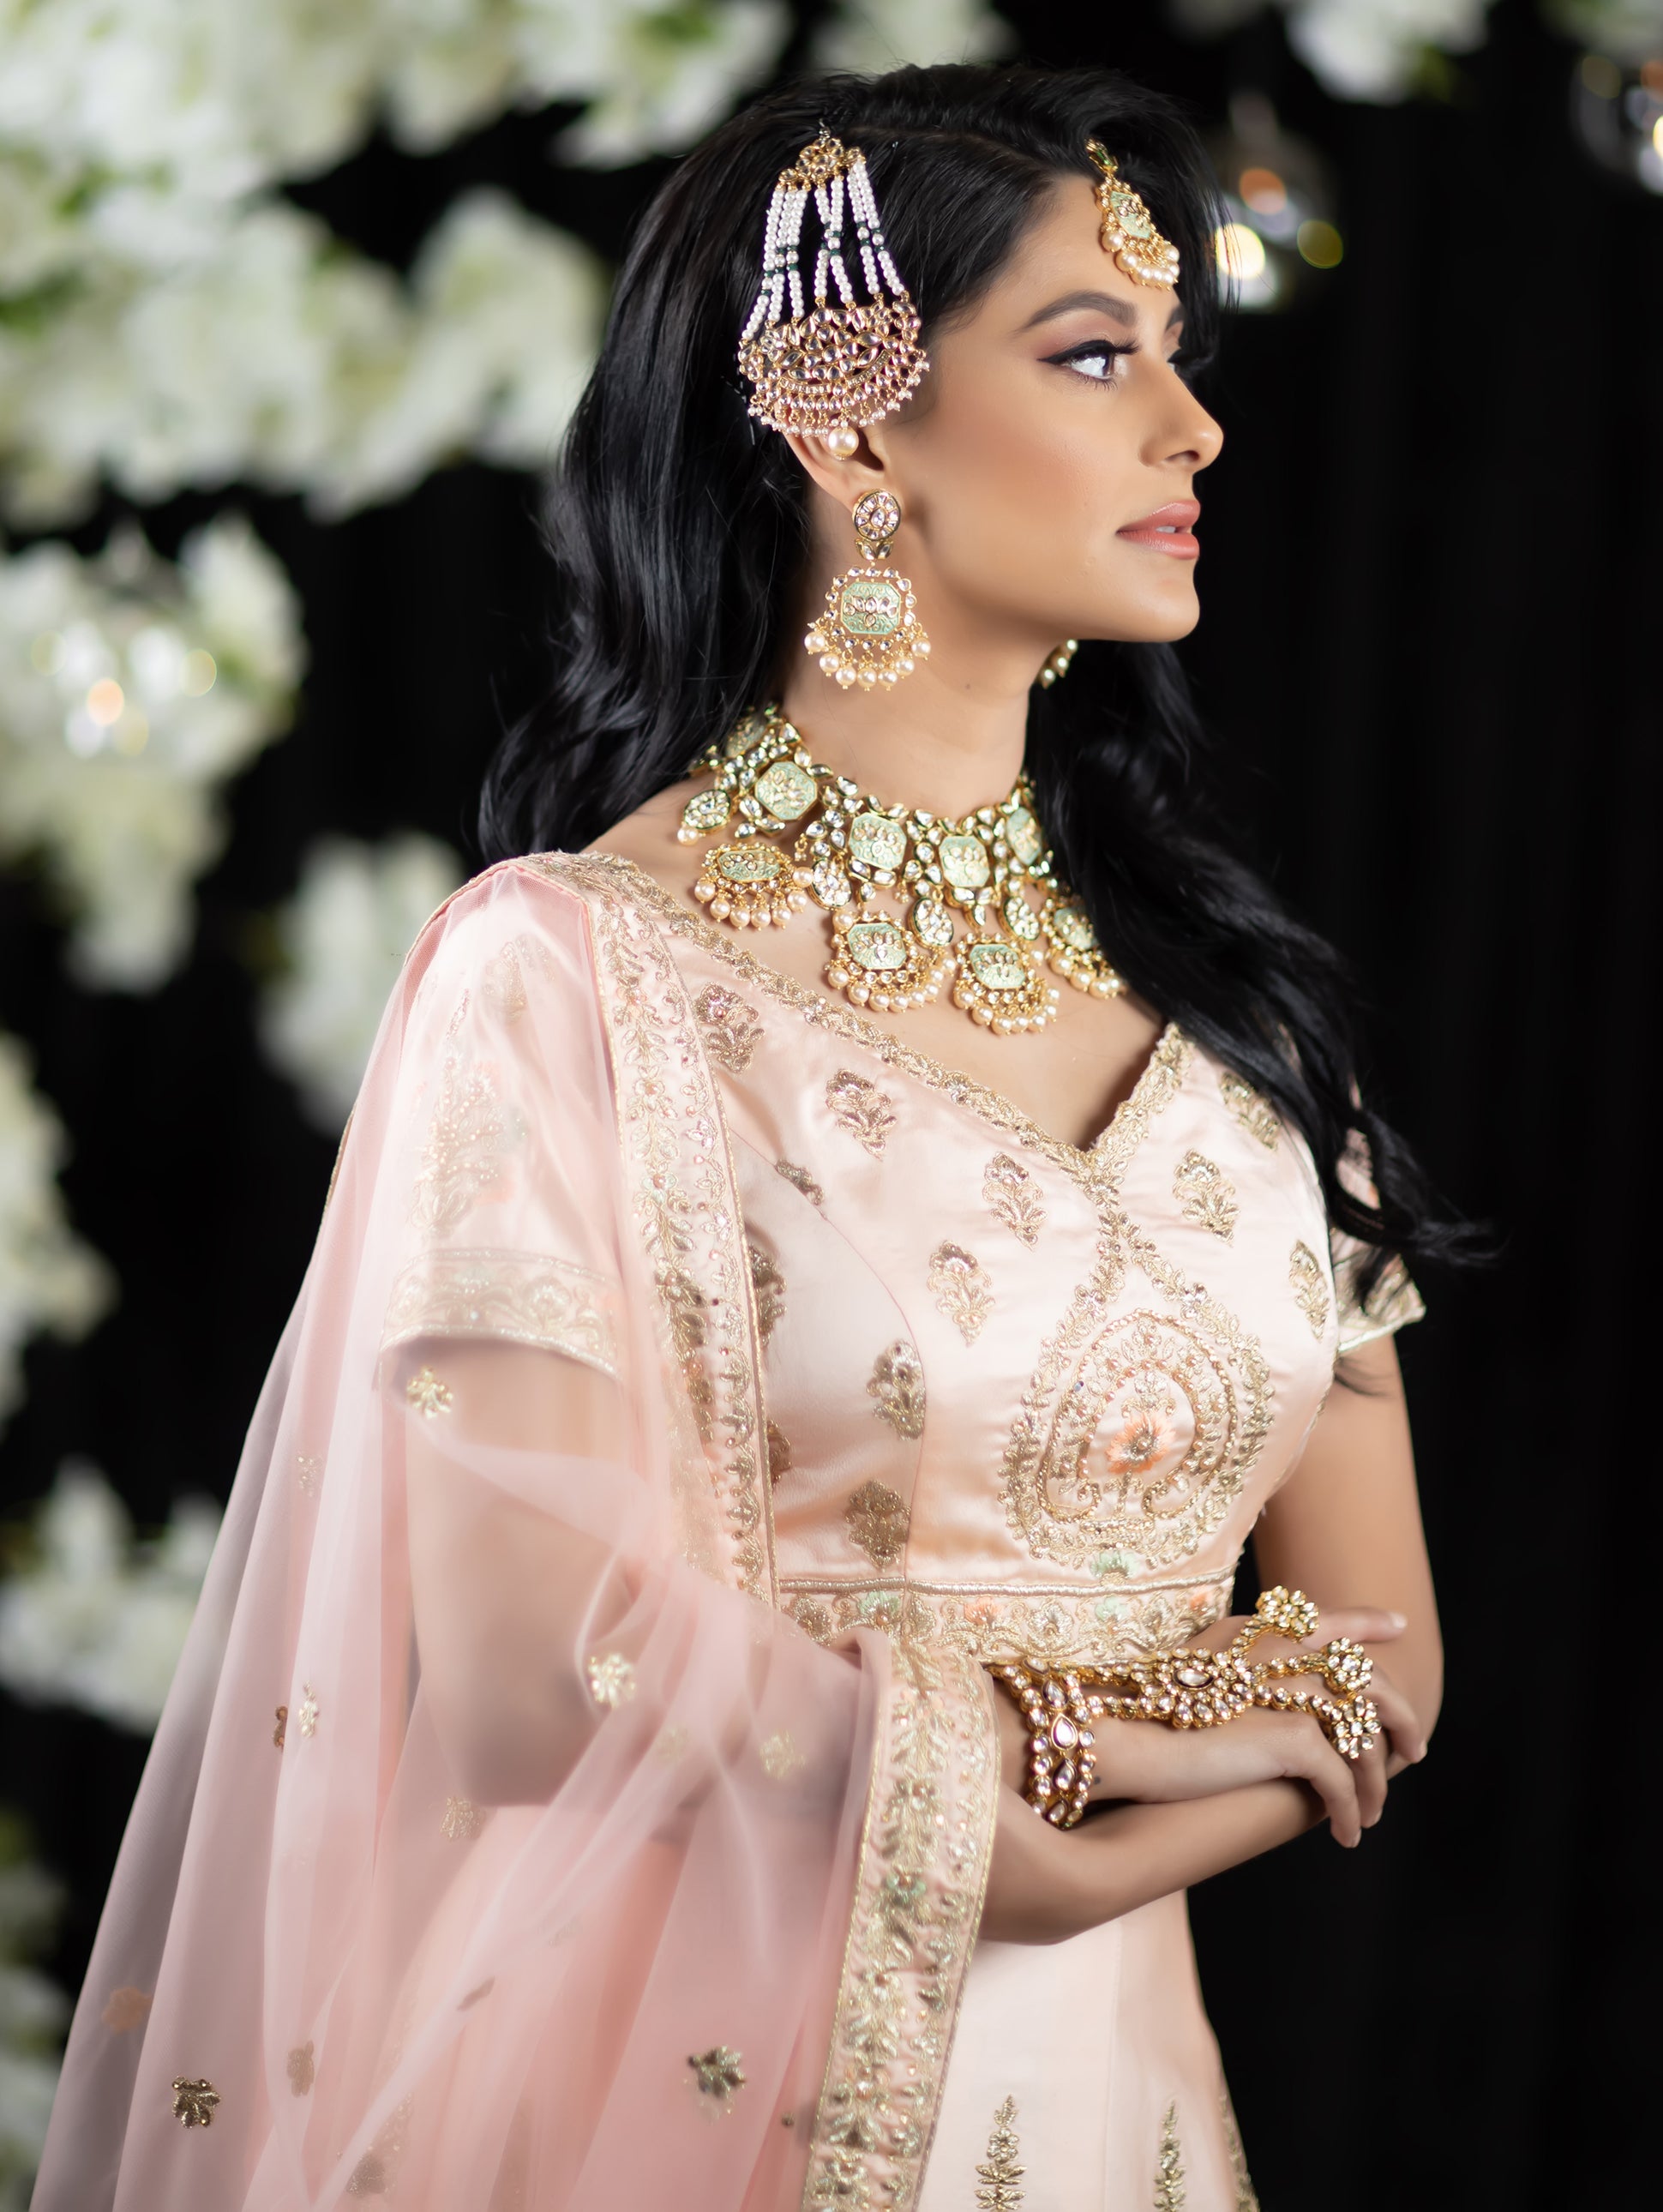 Pin by Hana Hamad on Dresses | Lehenga hairstyles, Traditional dresses,  Indian wedding outfits